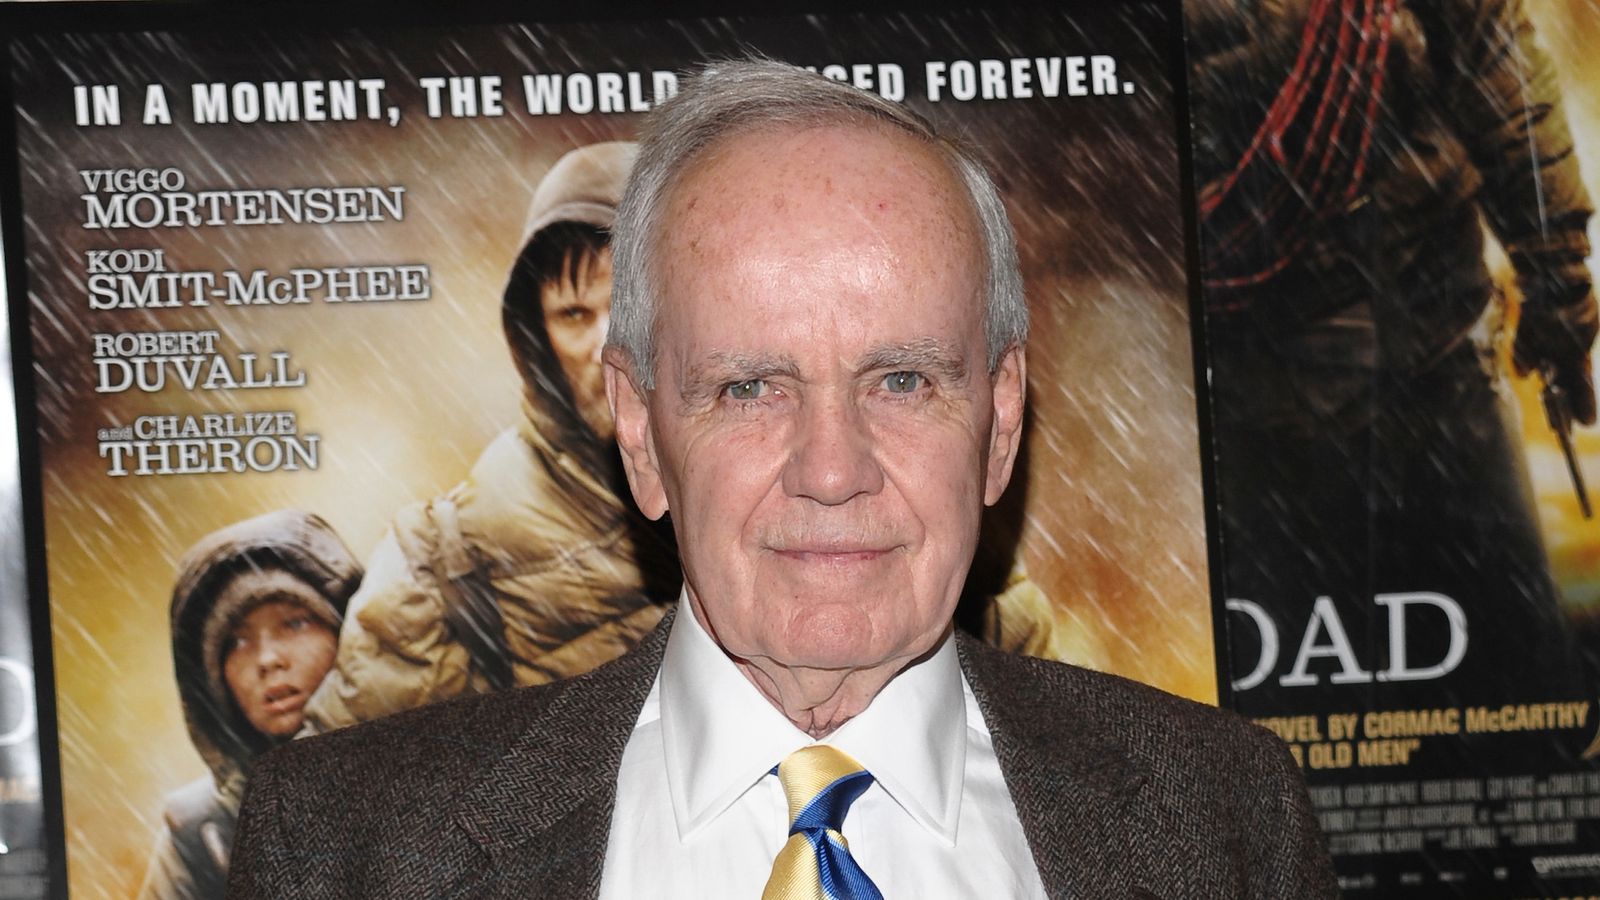 Cormac McCarthy: Author behind The Road and No Country For Old Men dies